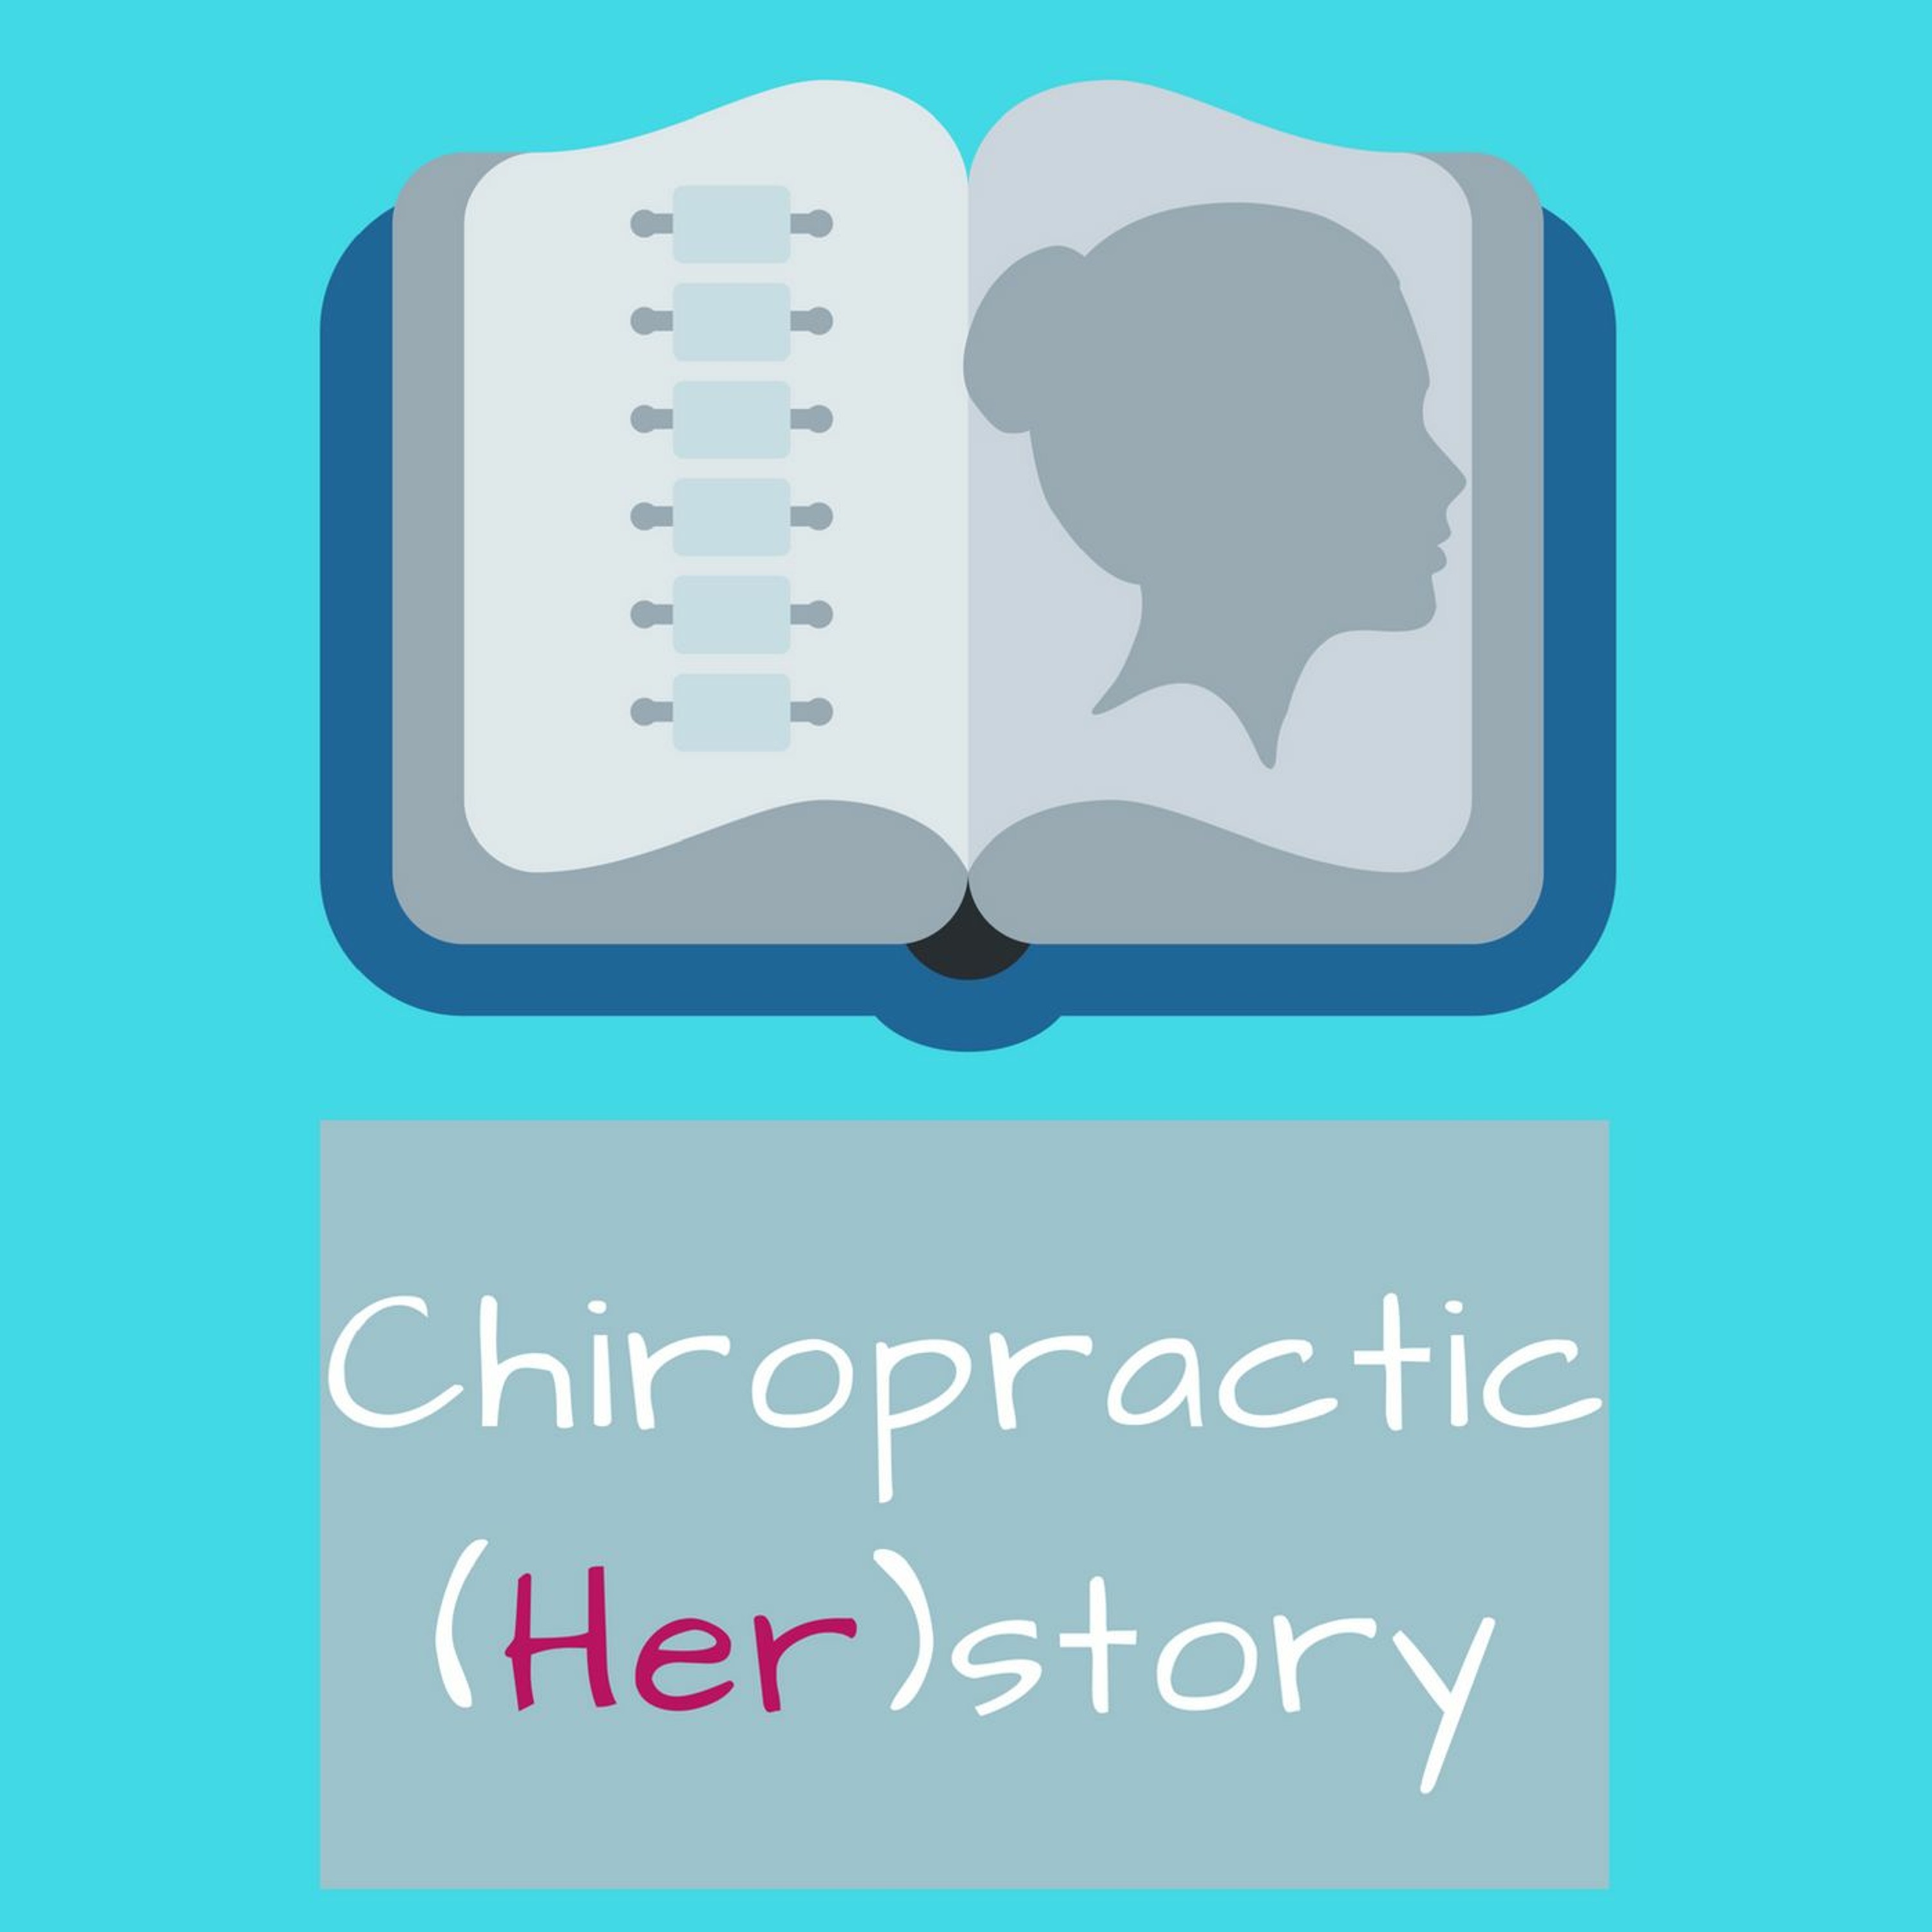 Dr. Cynthia Long- Chiropractic (Her)story Episode 51